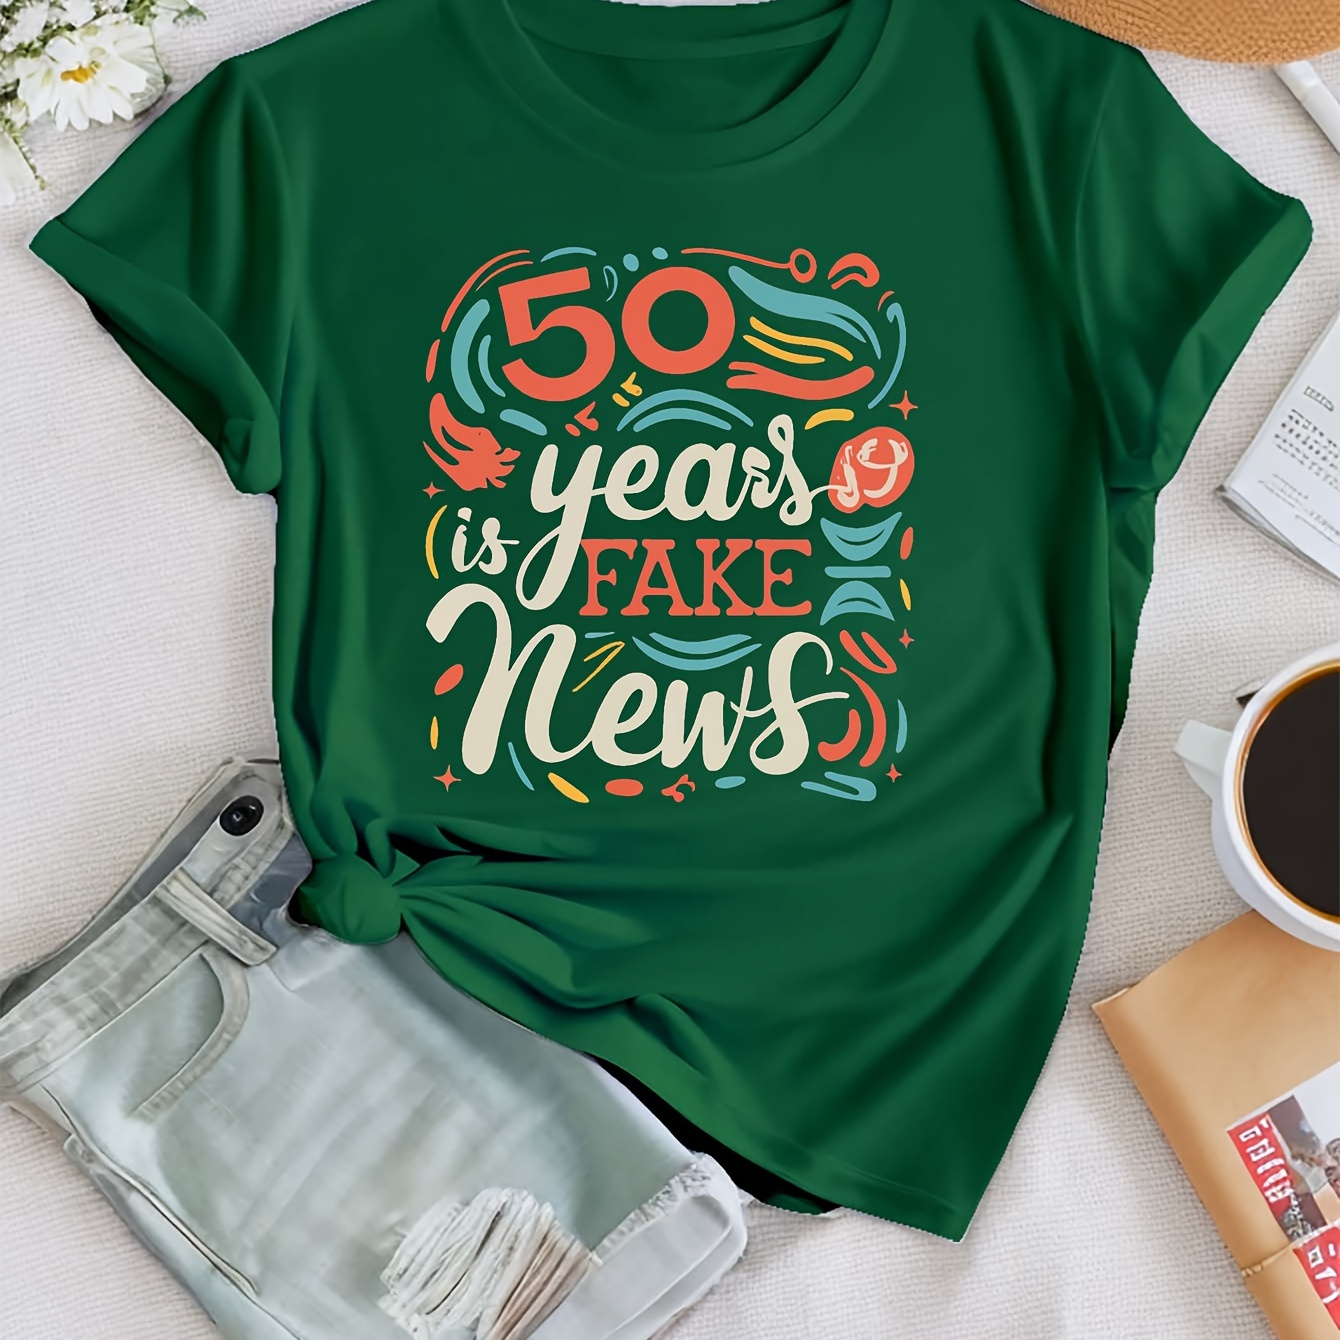 

Birthday 50 Years Is Fake News Print T-shirt, Short Sleeve Crew Neck Casual Top For Summer & Spring, Women's Clothing